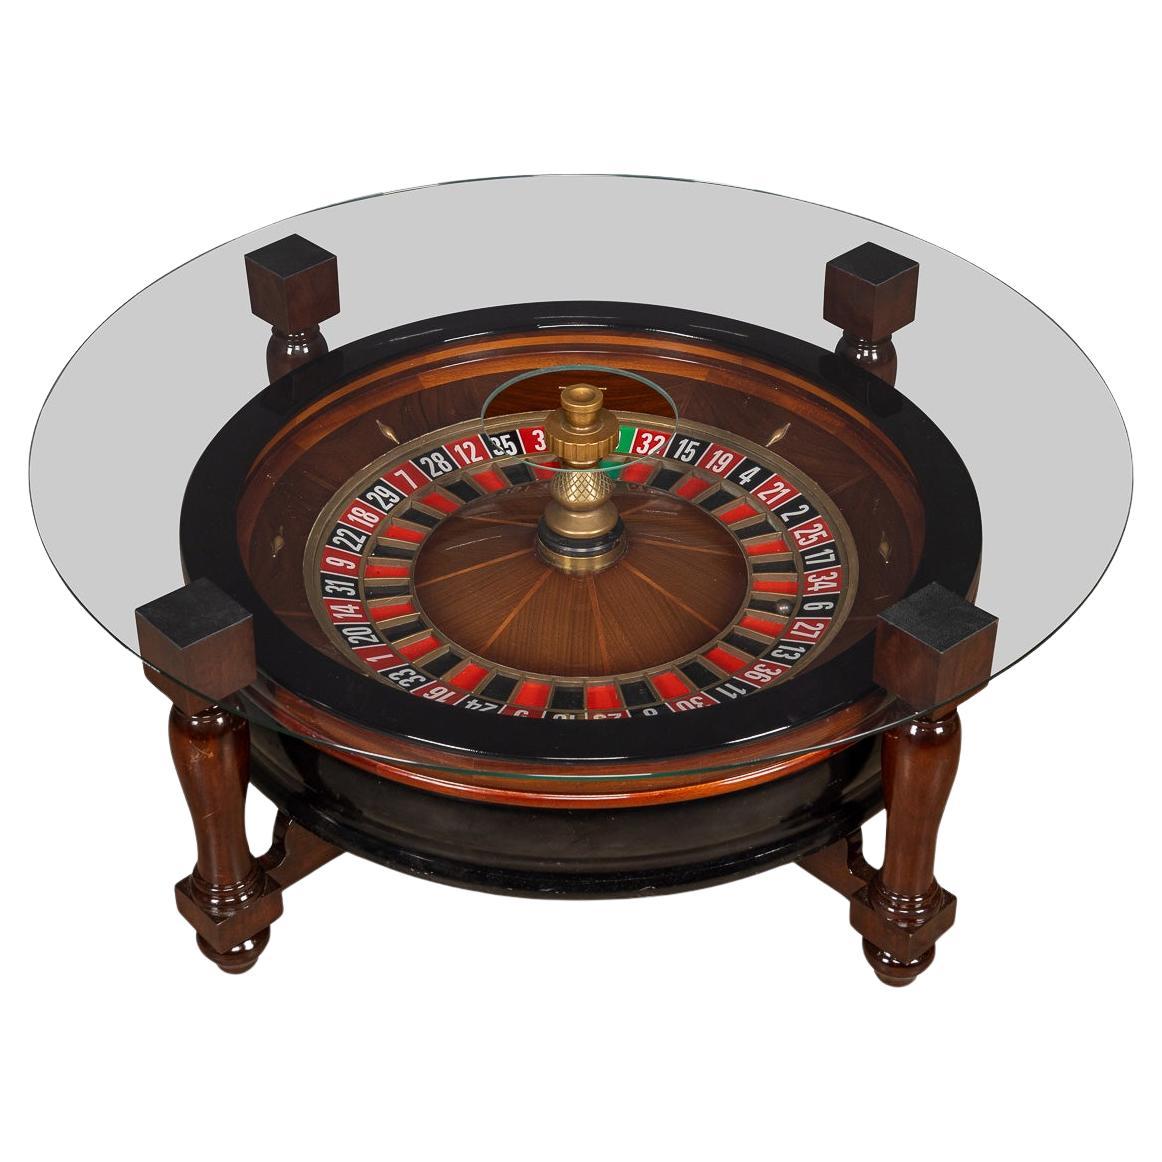 Casino Roulette Wheel Mounted Within A Coffee Table For Sale